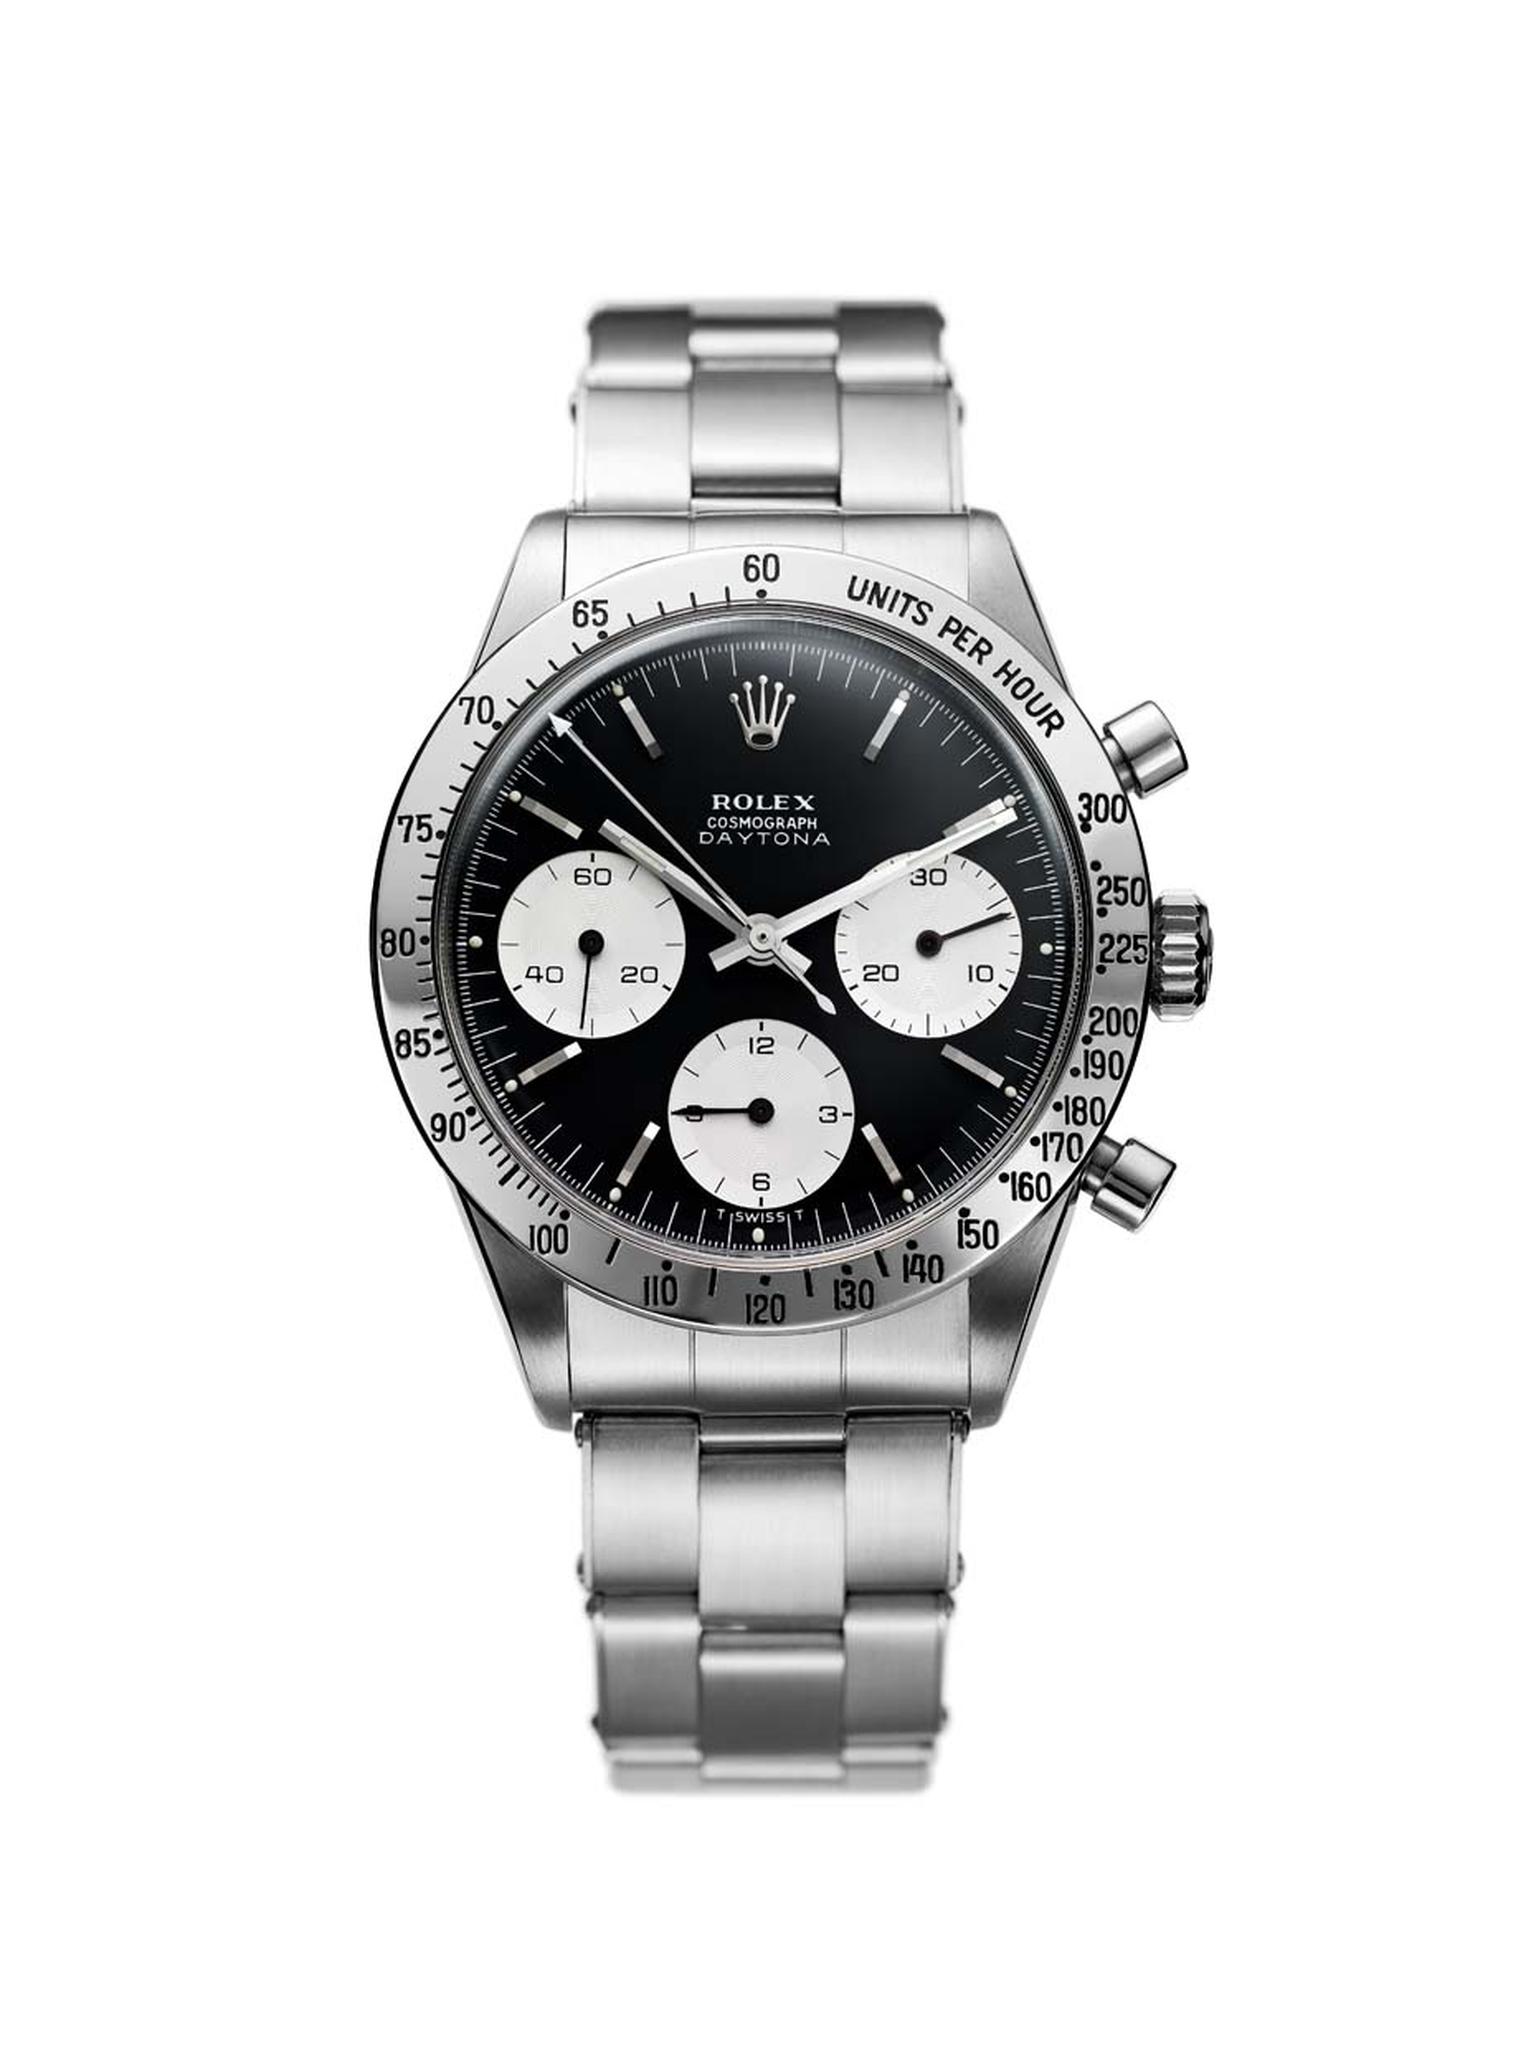 Rolex Cosmograph Daytona 1963 is, for 